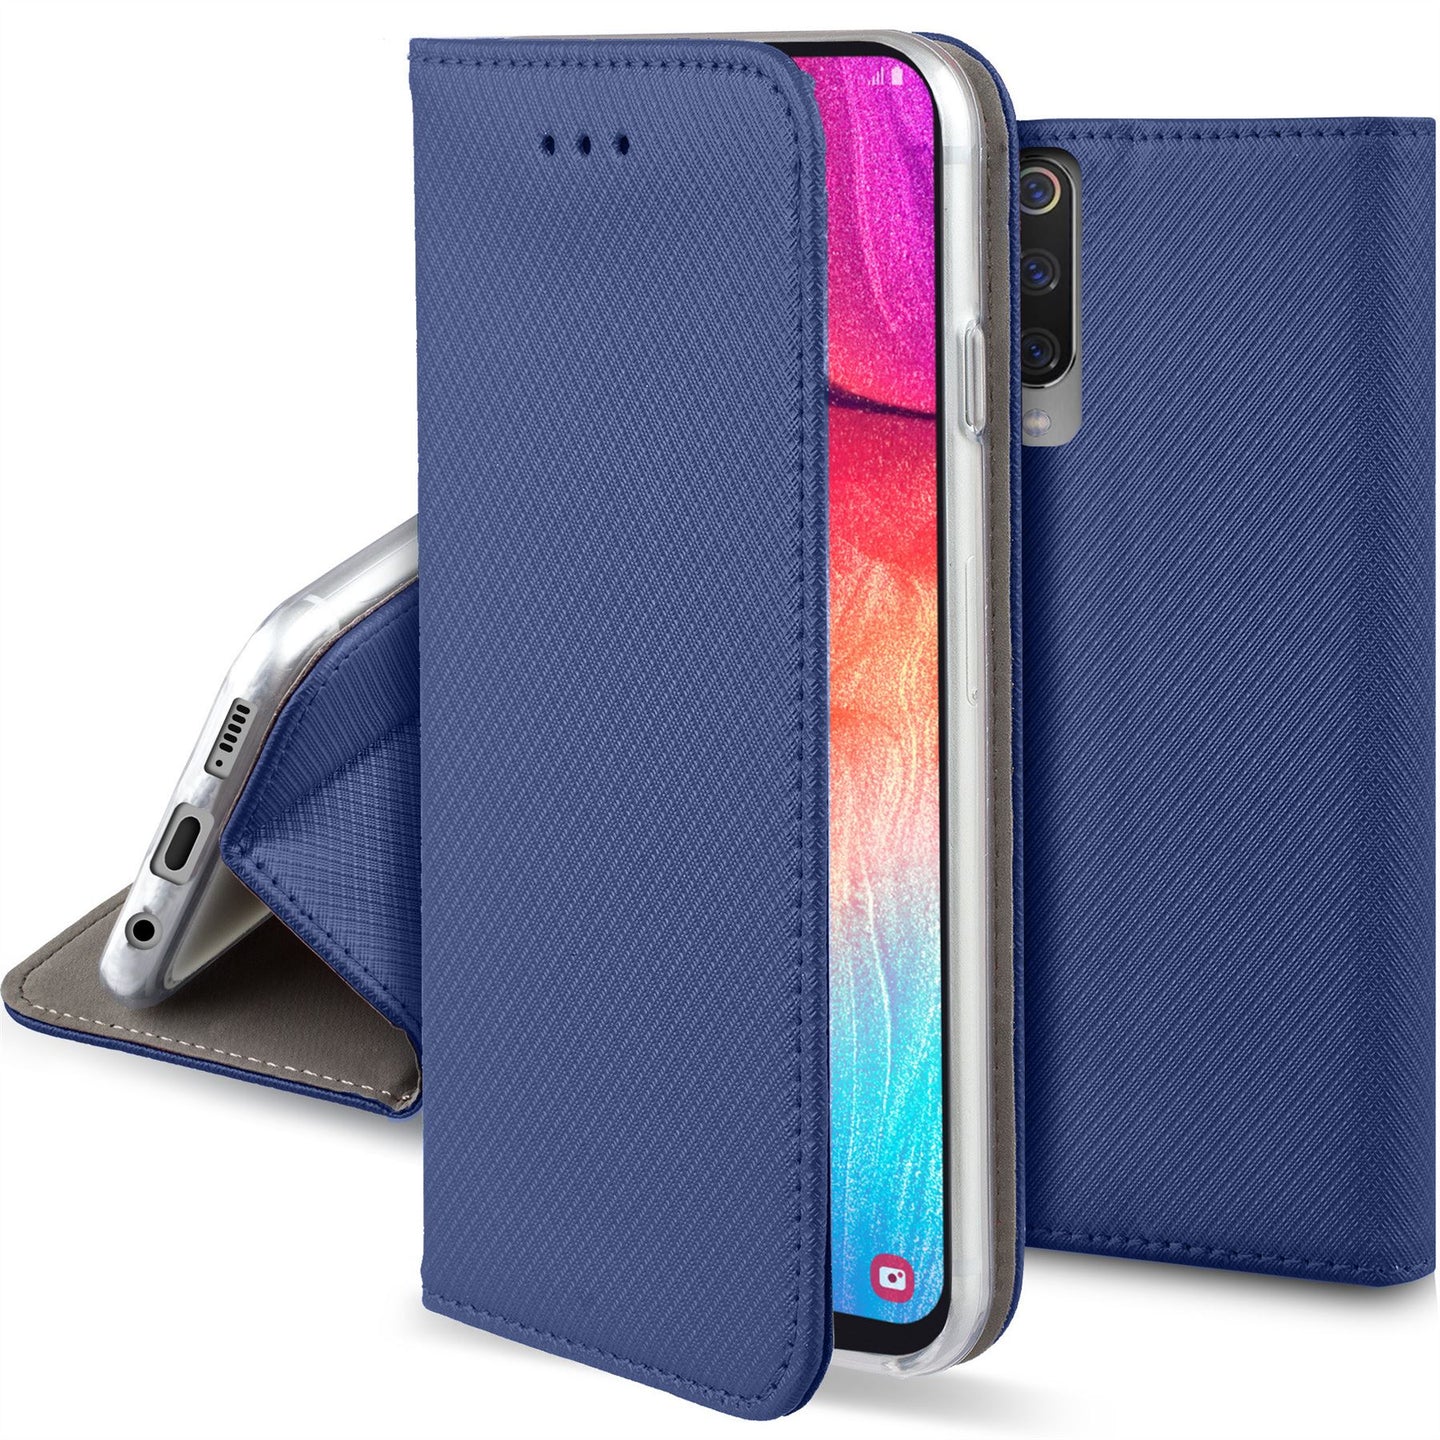 Moozy Case Flip Cover for Samsung A50, Dark Blue - Smart Magnetic Flip Case with Card Holder and Stand